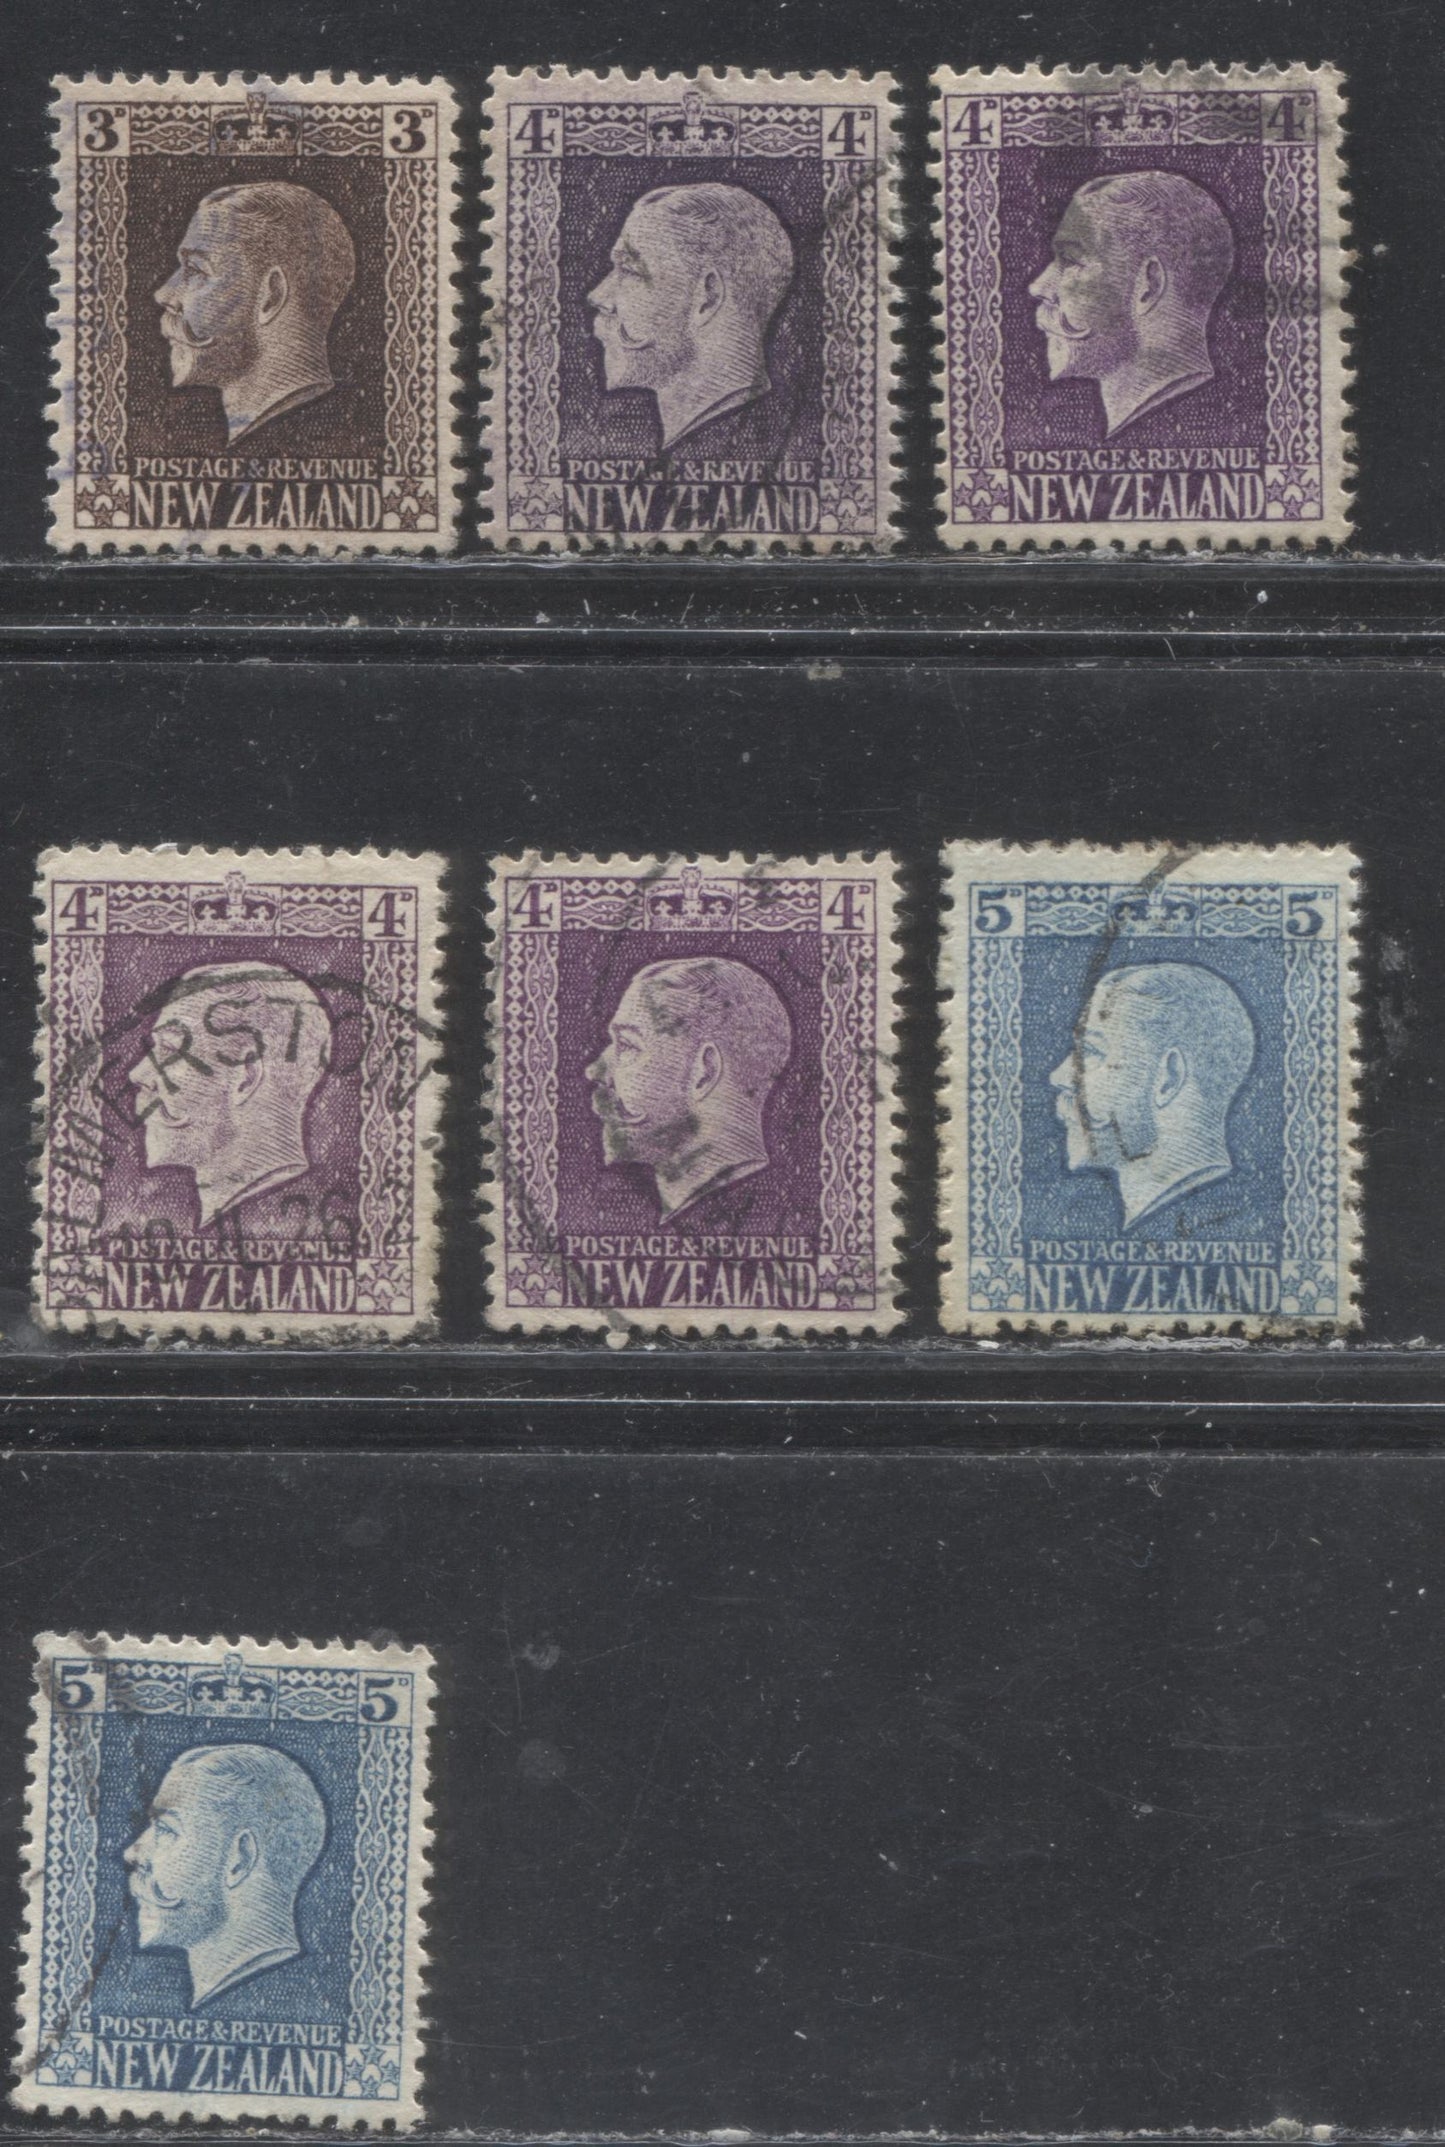 Lot 176 New Zealand SG#420/424d 3d - 5d Deep Brown - Light Blue King George V, 1915-1930 Perkins Bacon Engraved Portrait Issue, 7 Fine and VF Used Singles, Single Watermark, Cowan Paper, Perf. 14 x 13.5, Including Extra Shades of the 4d